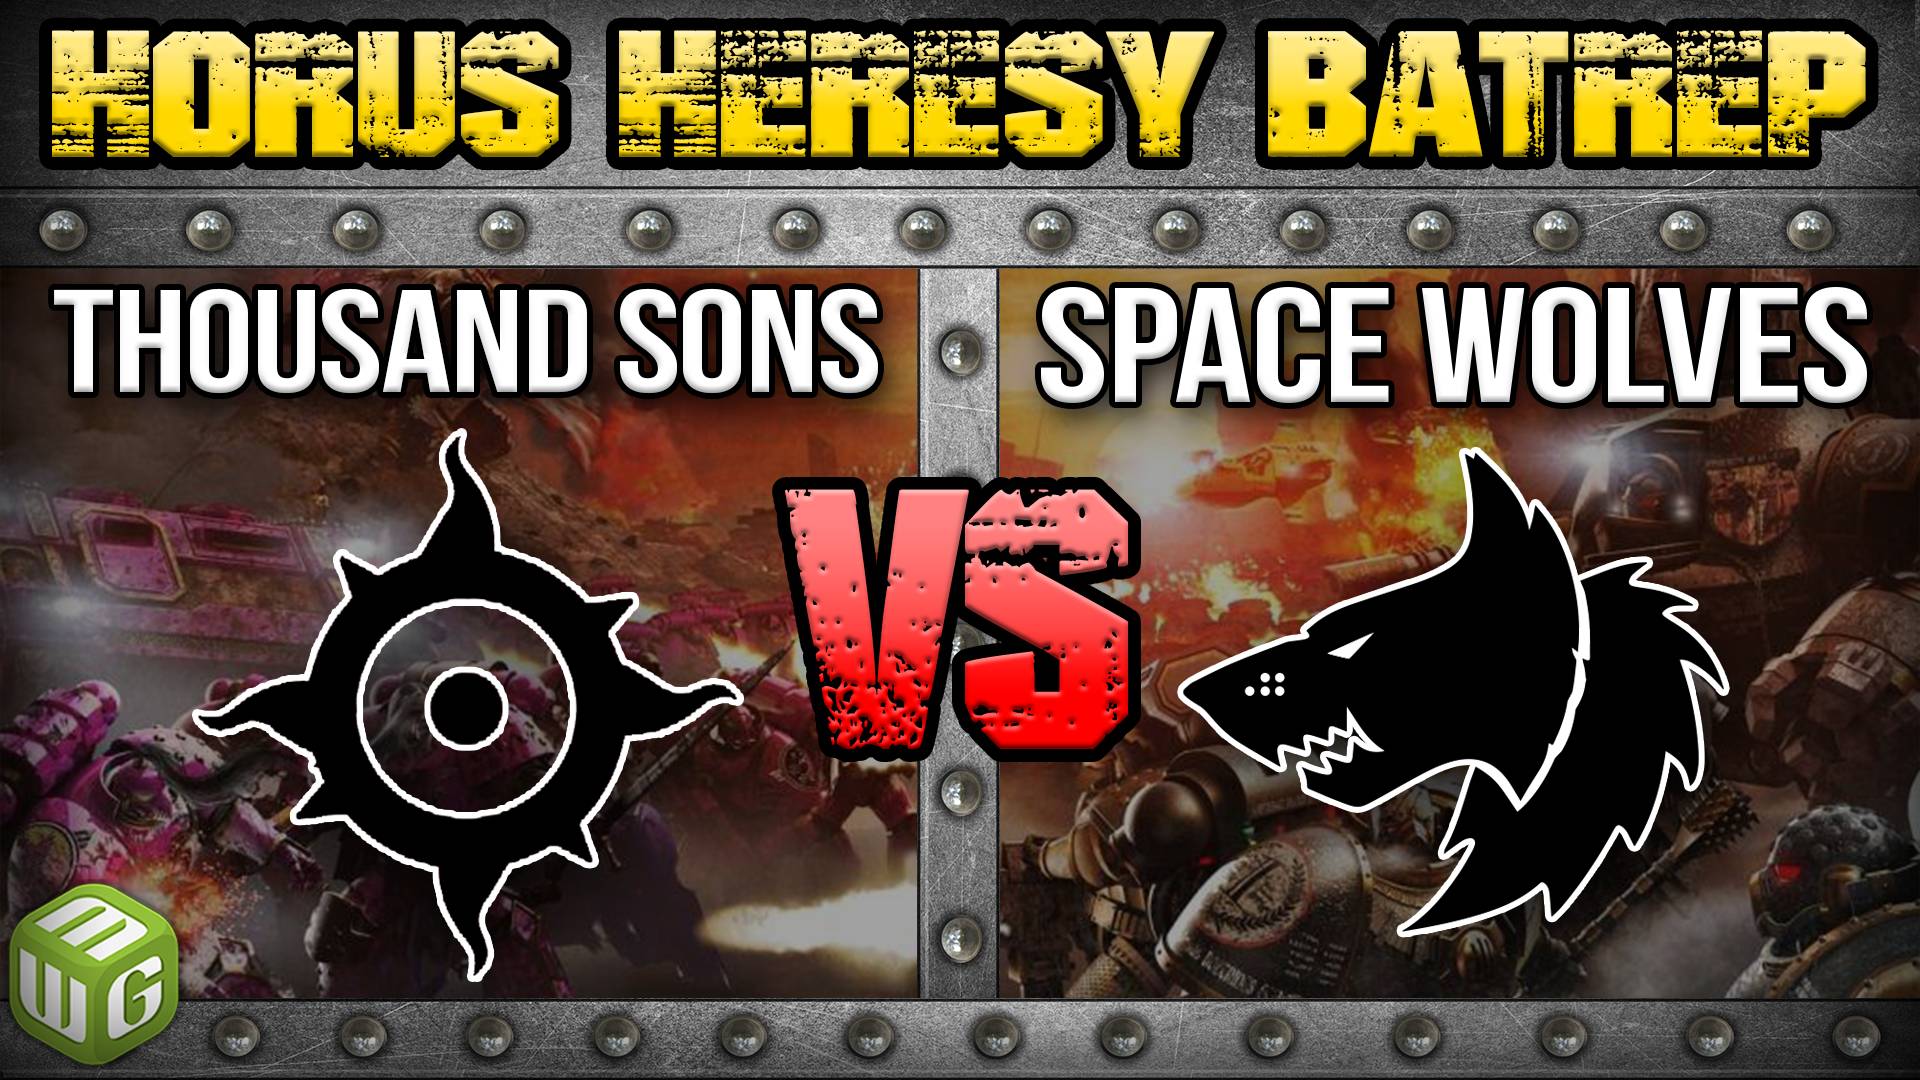 Lists for Thousand Sons vs Space Wolves Horus Heresy Live Battle Report